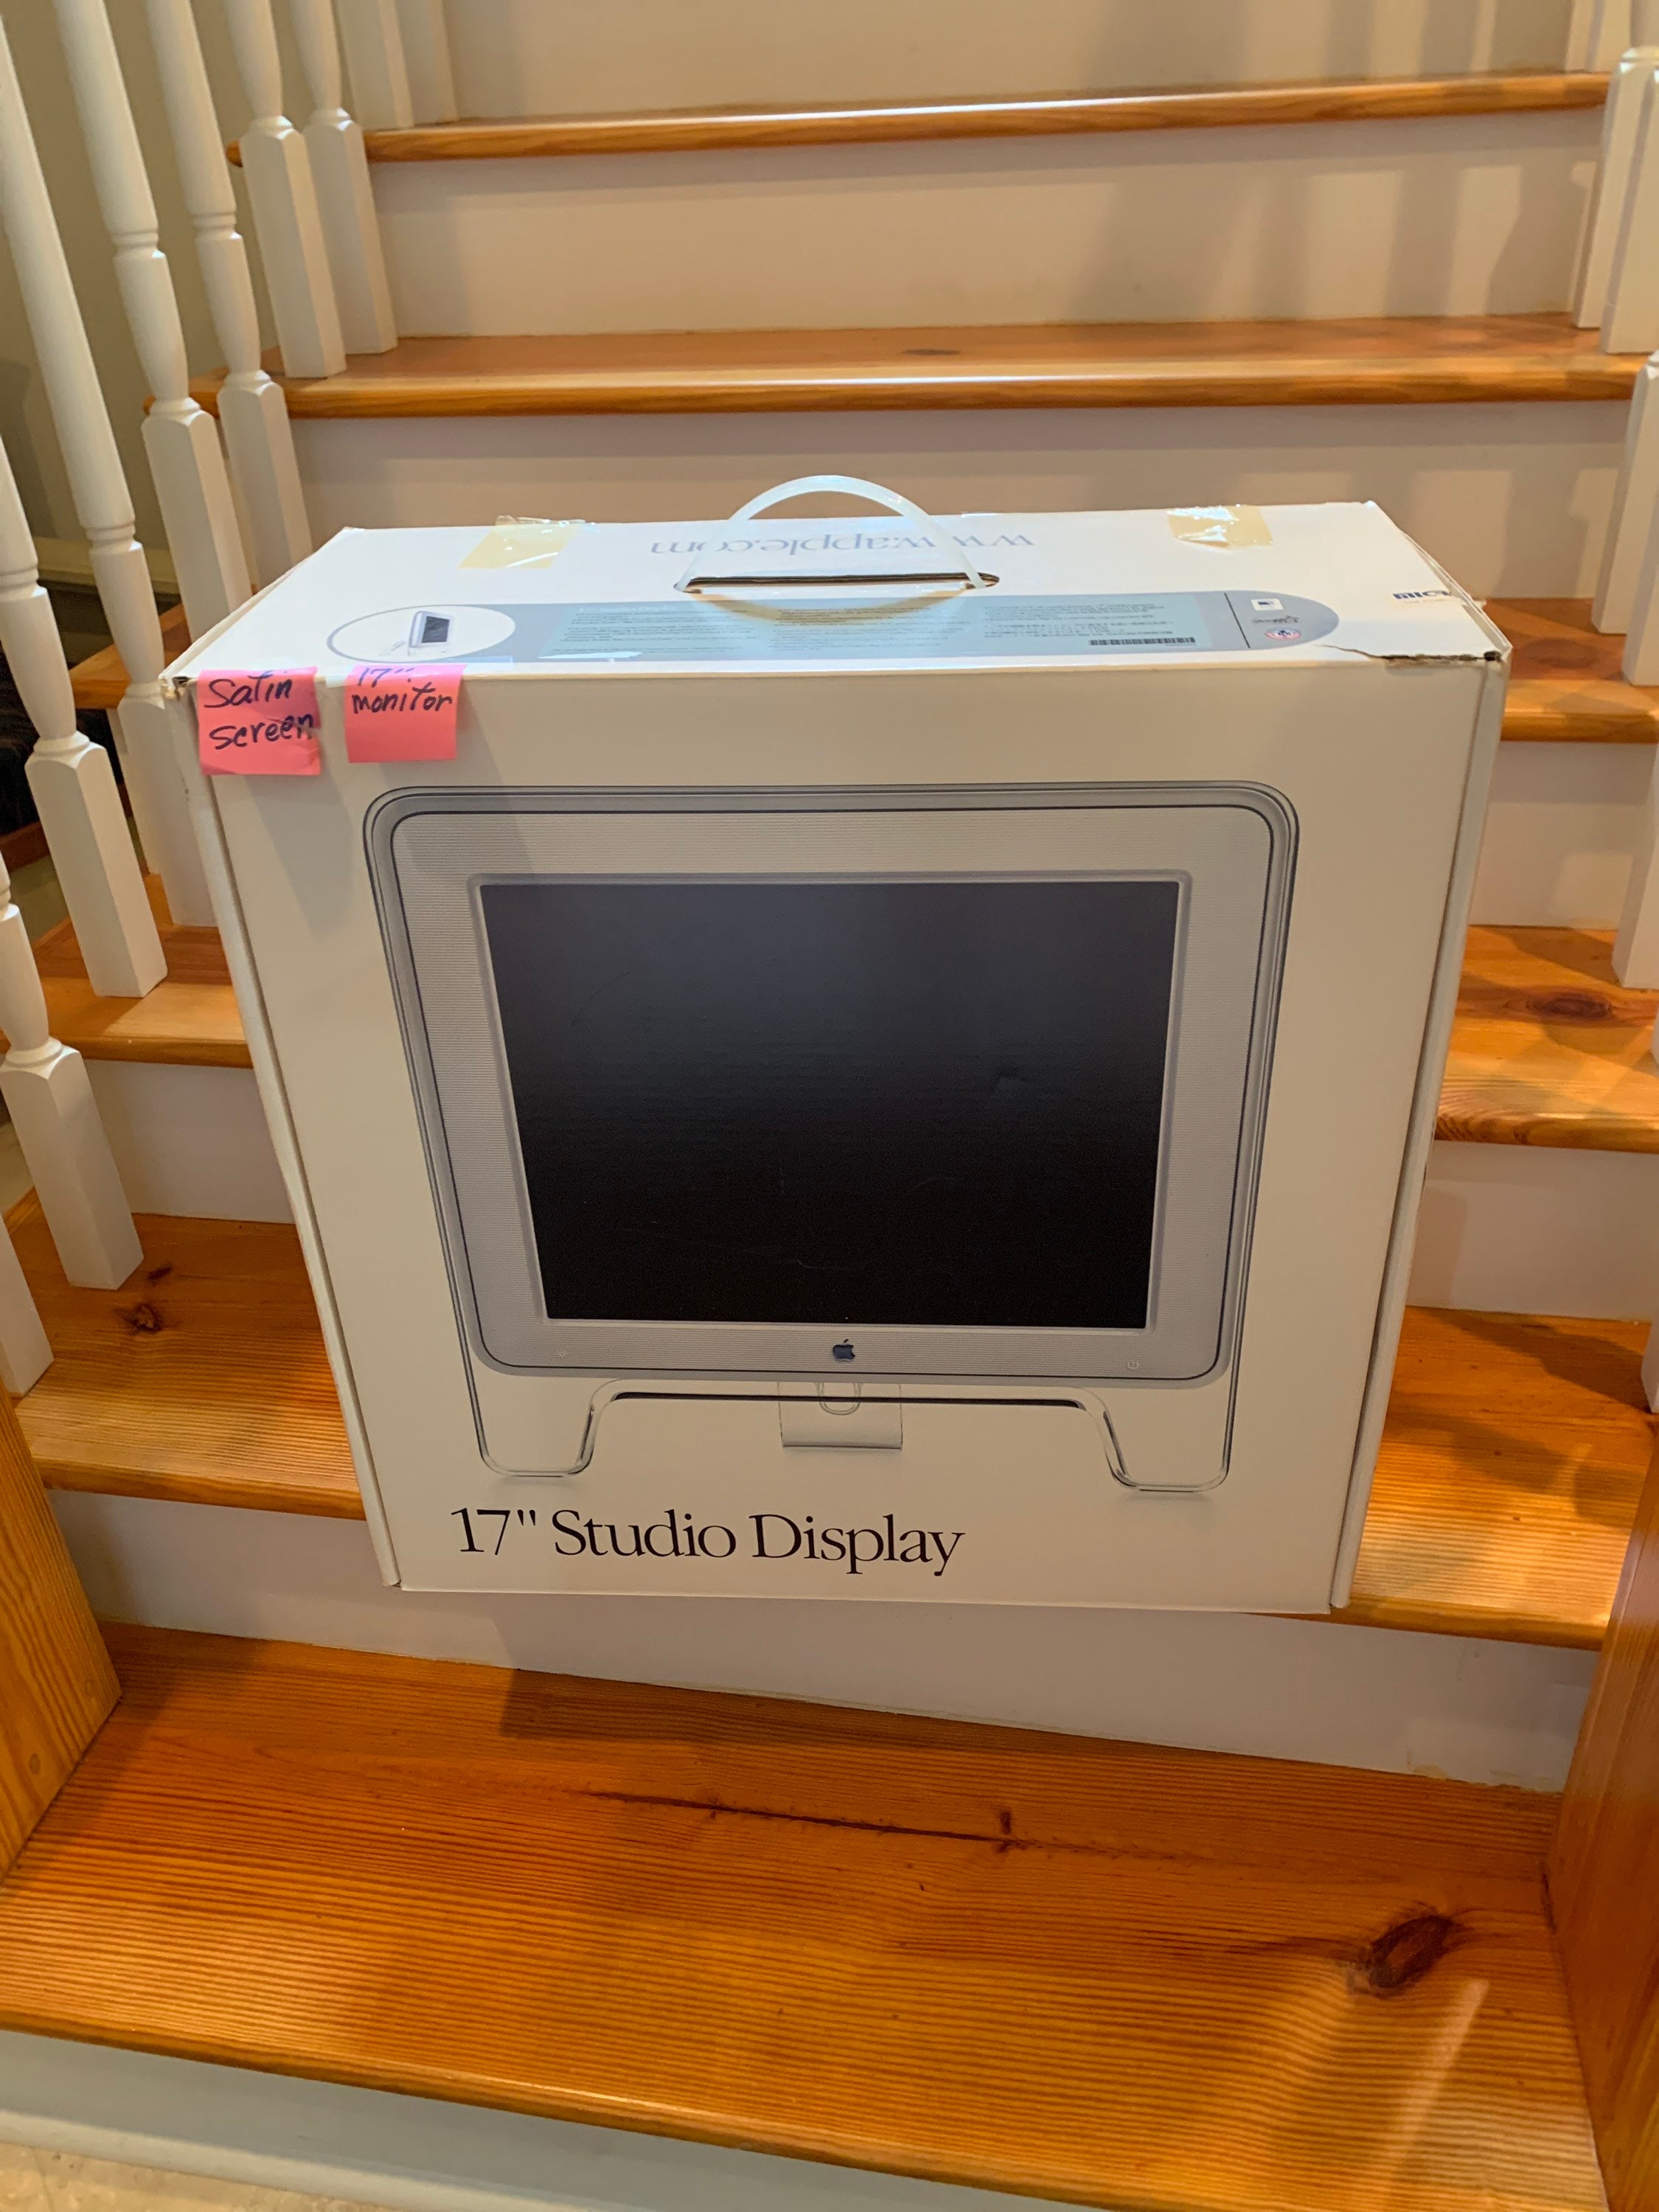 Apple Studio Display 17” LCD Monitor M7649 SATIN SCREEN Vintage Complete in  Original Box great condition